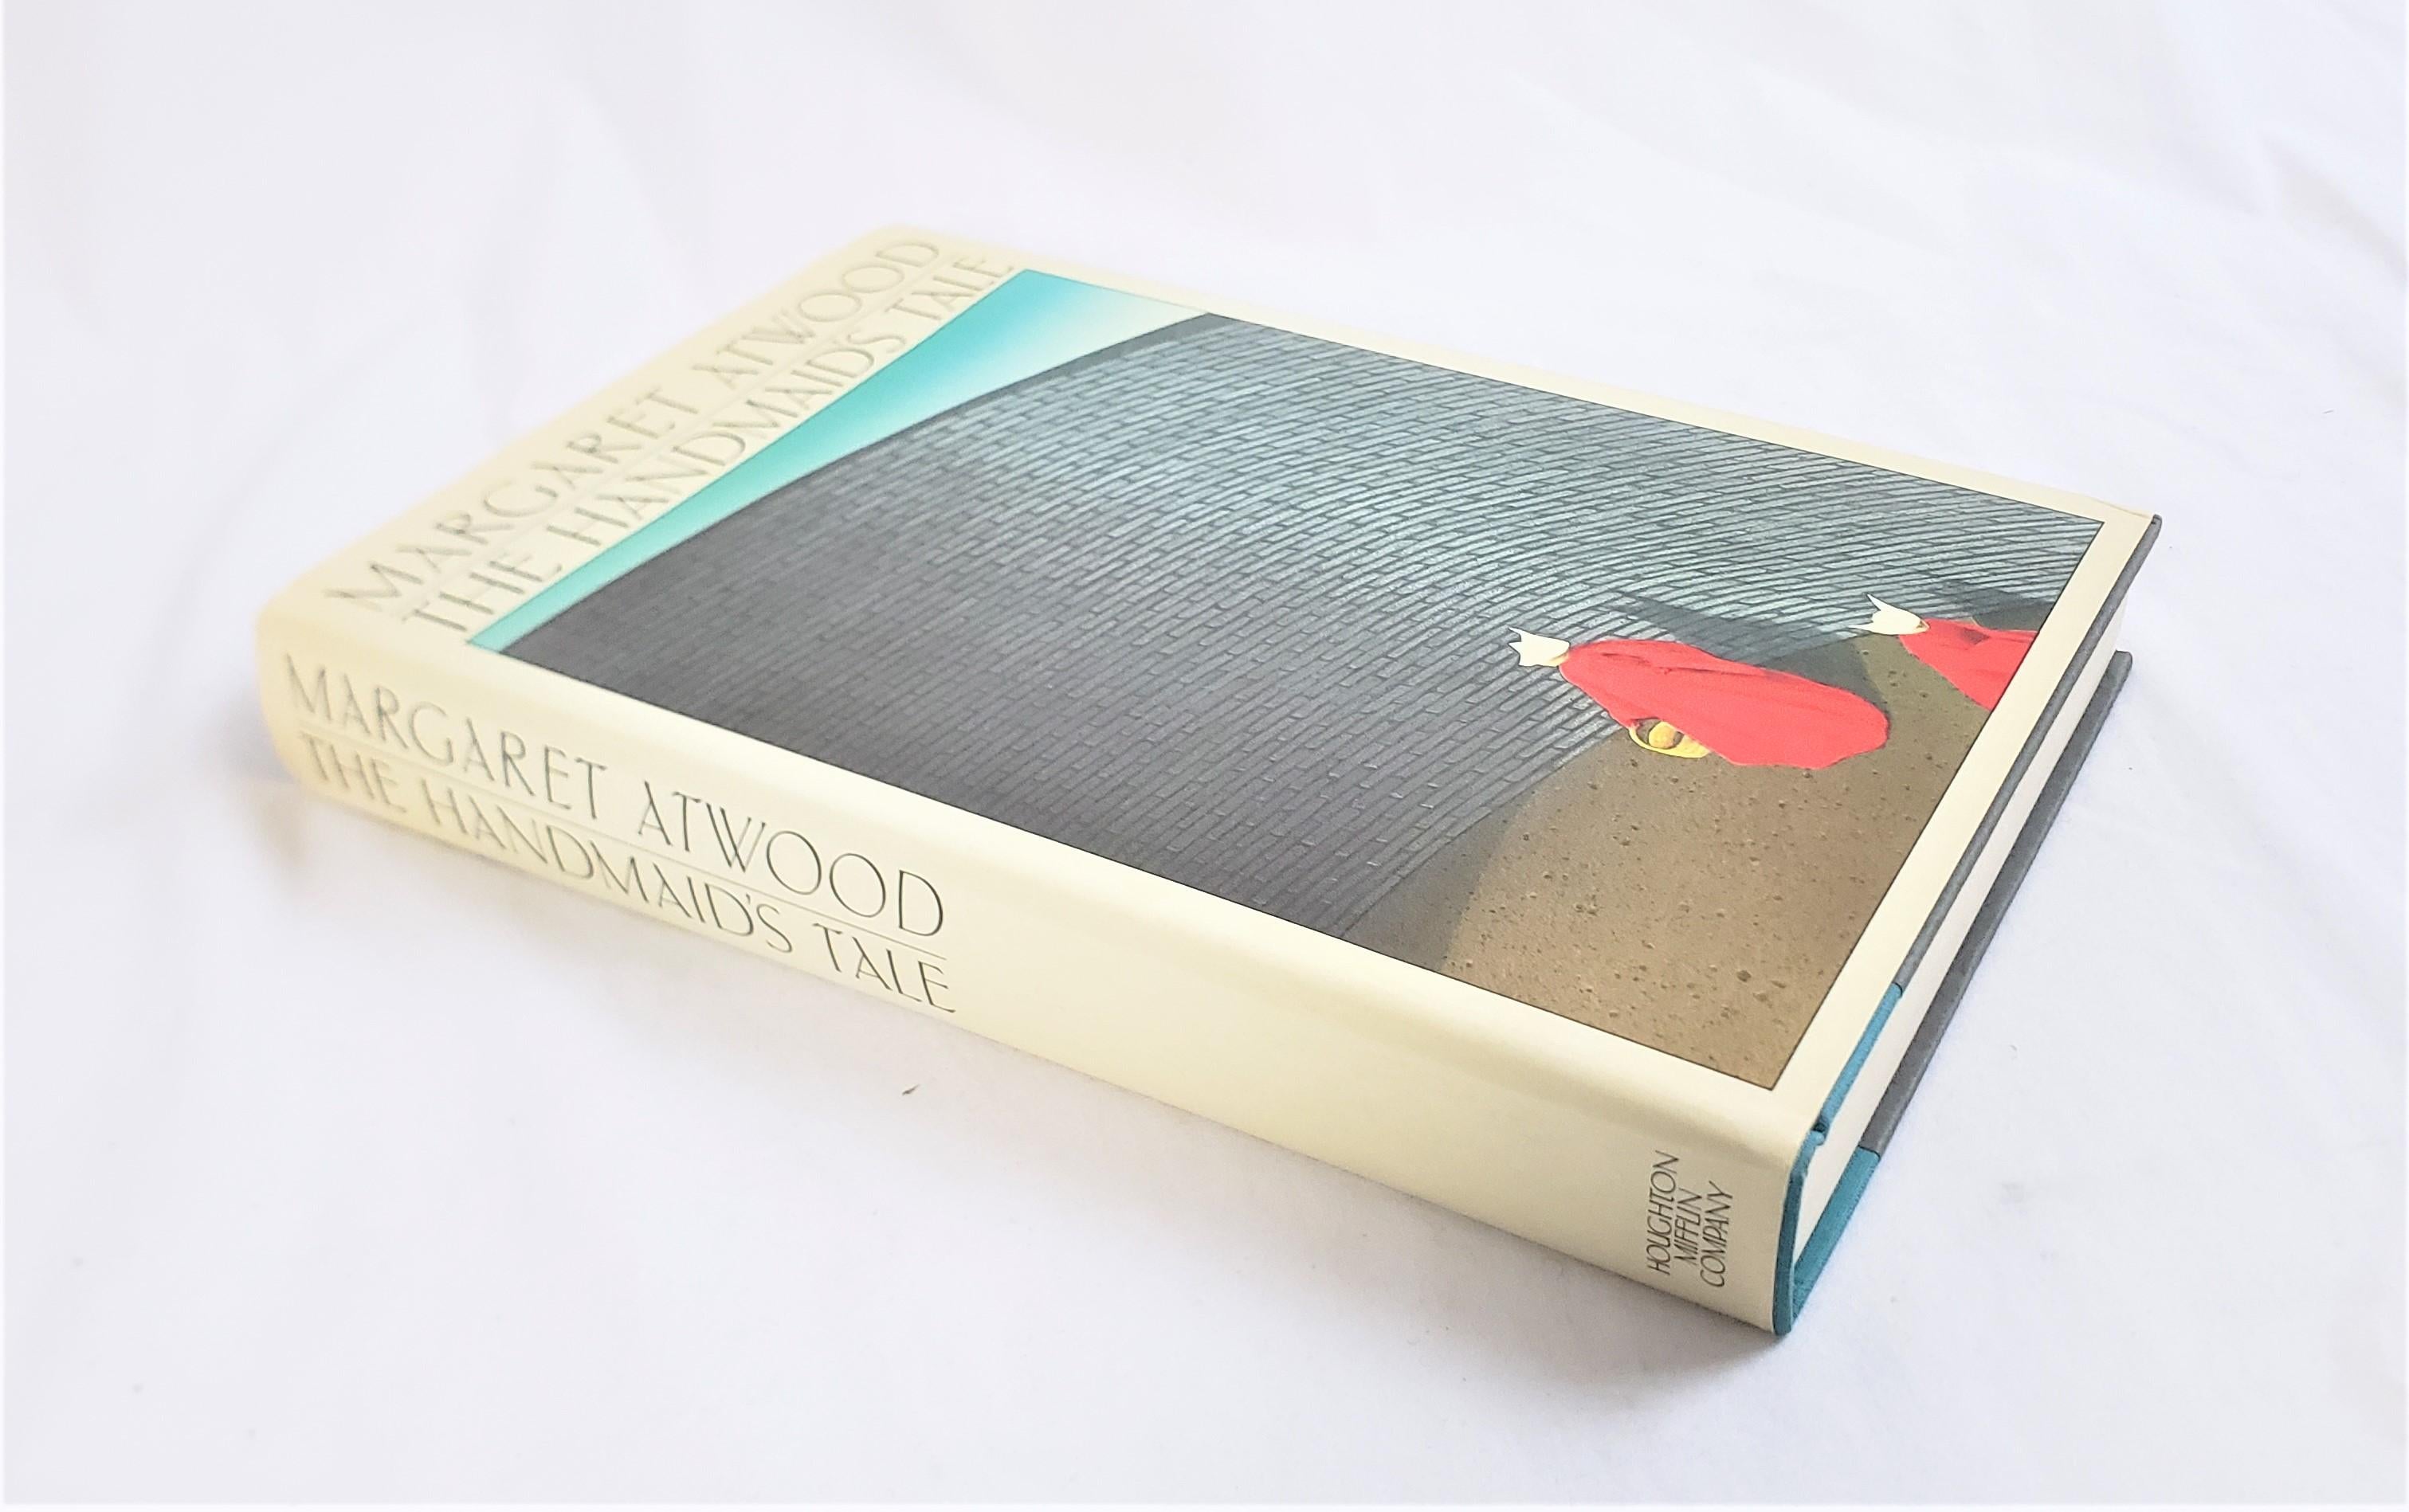 This vintage book was written by the well known Canadian author; Margaret Atwood and entitled 